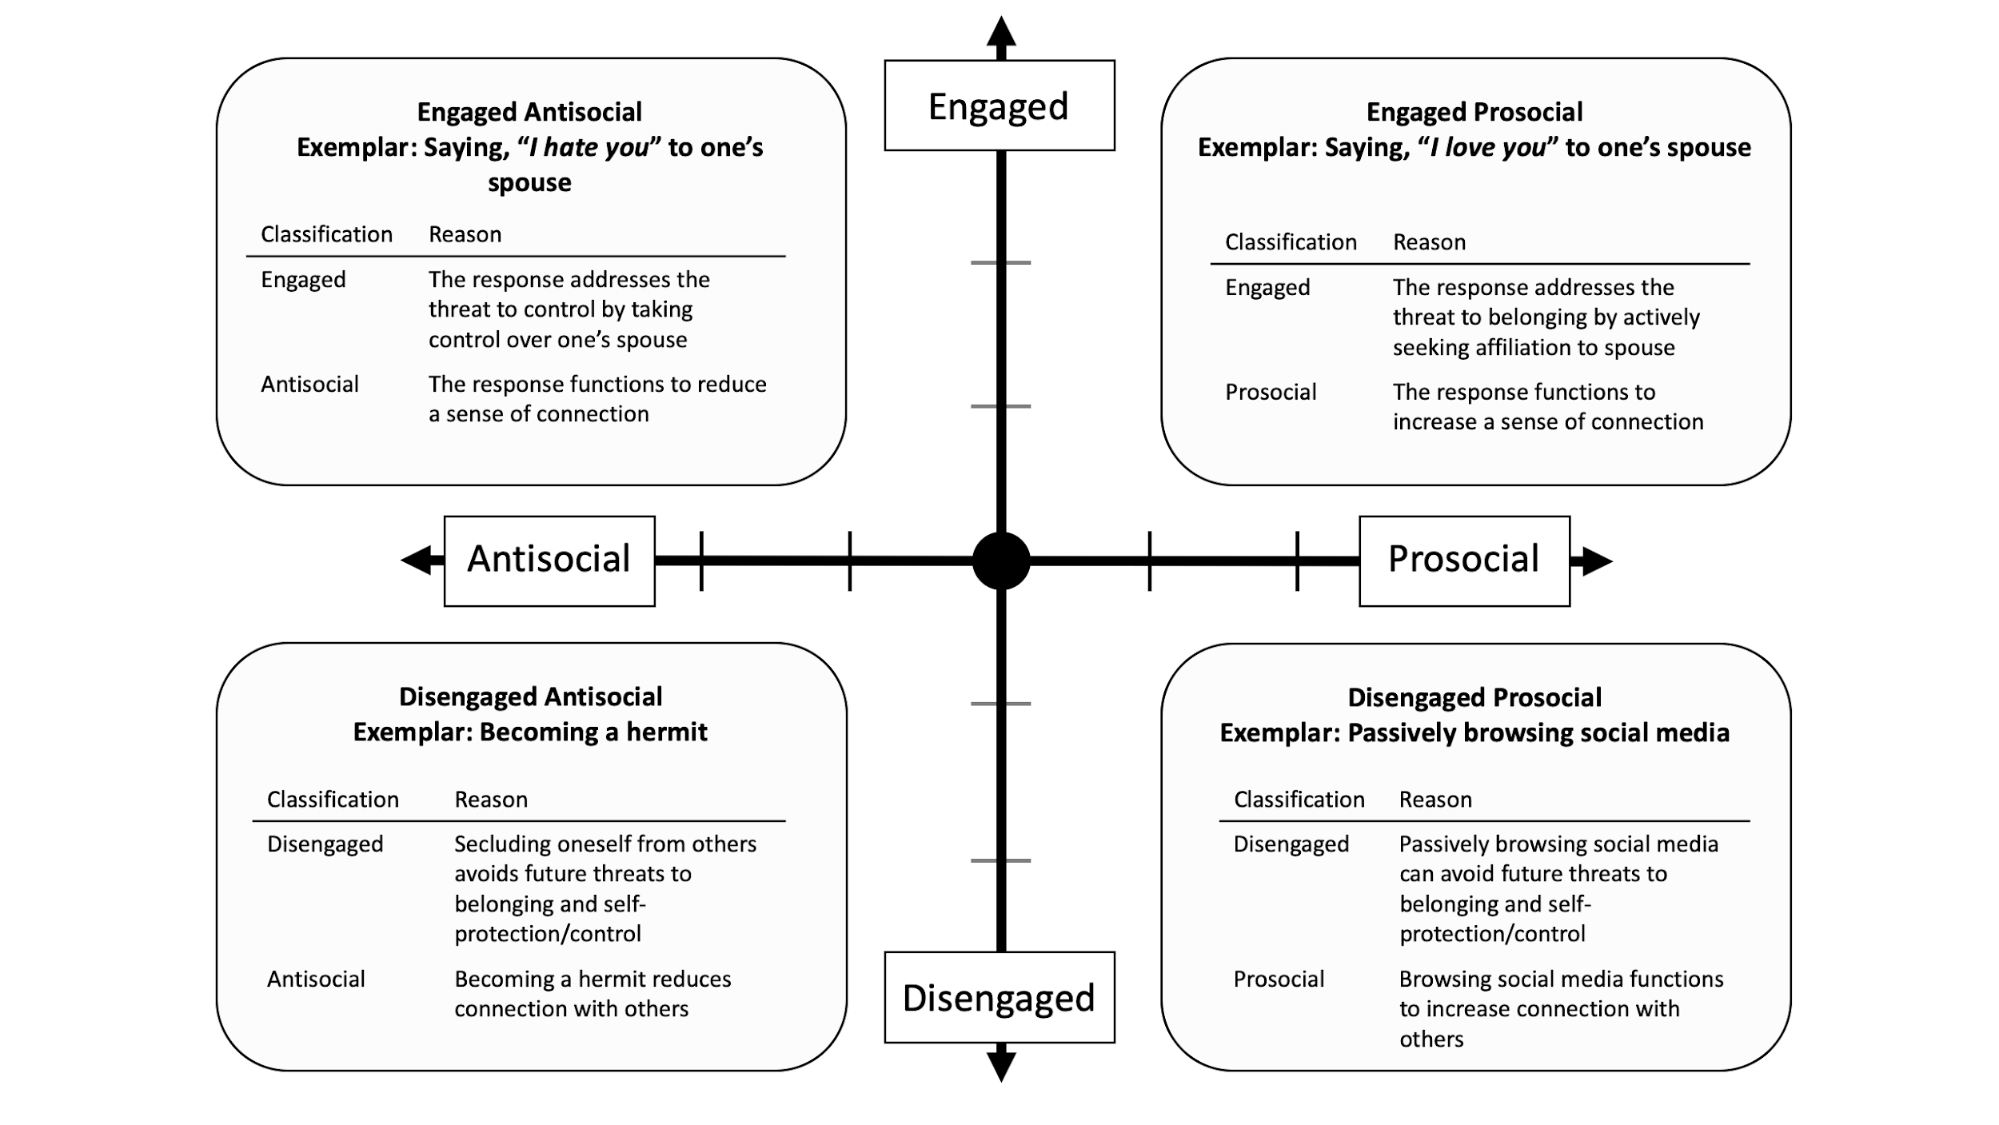 Summary of exemplar responses across quadrants. For each exemplar, we present reasons why we characterize them as antisocial versus prosocial and engaged versus disengaged.